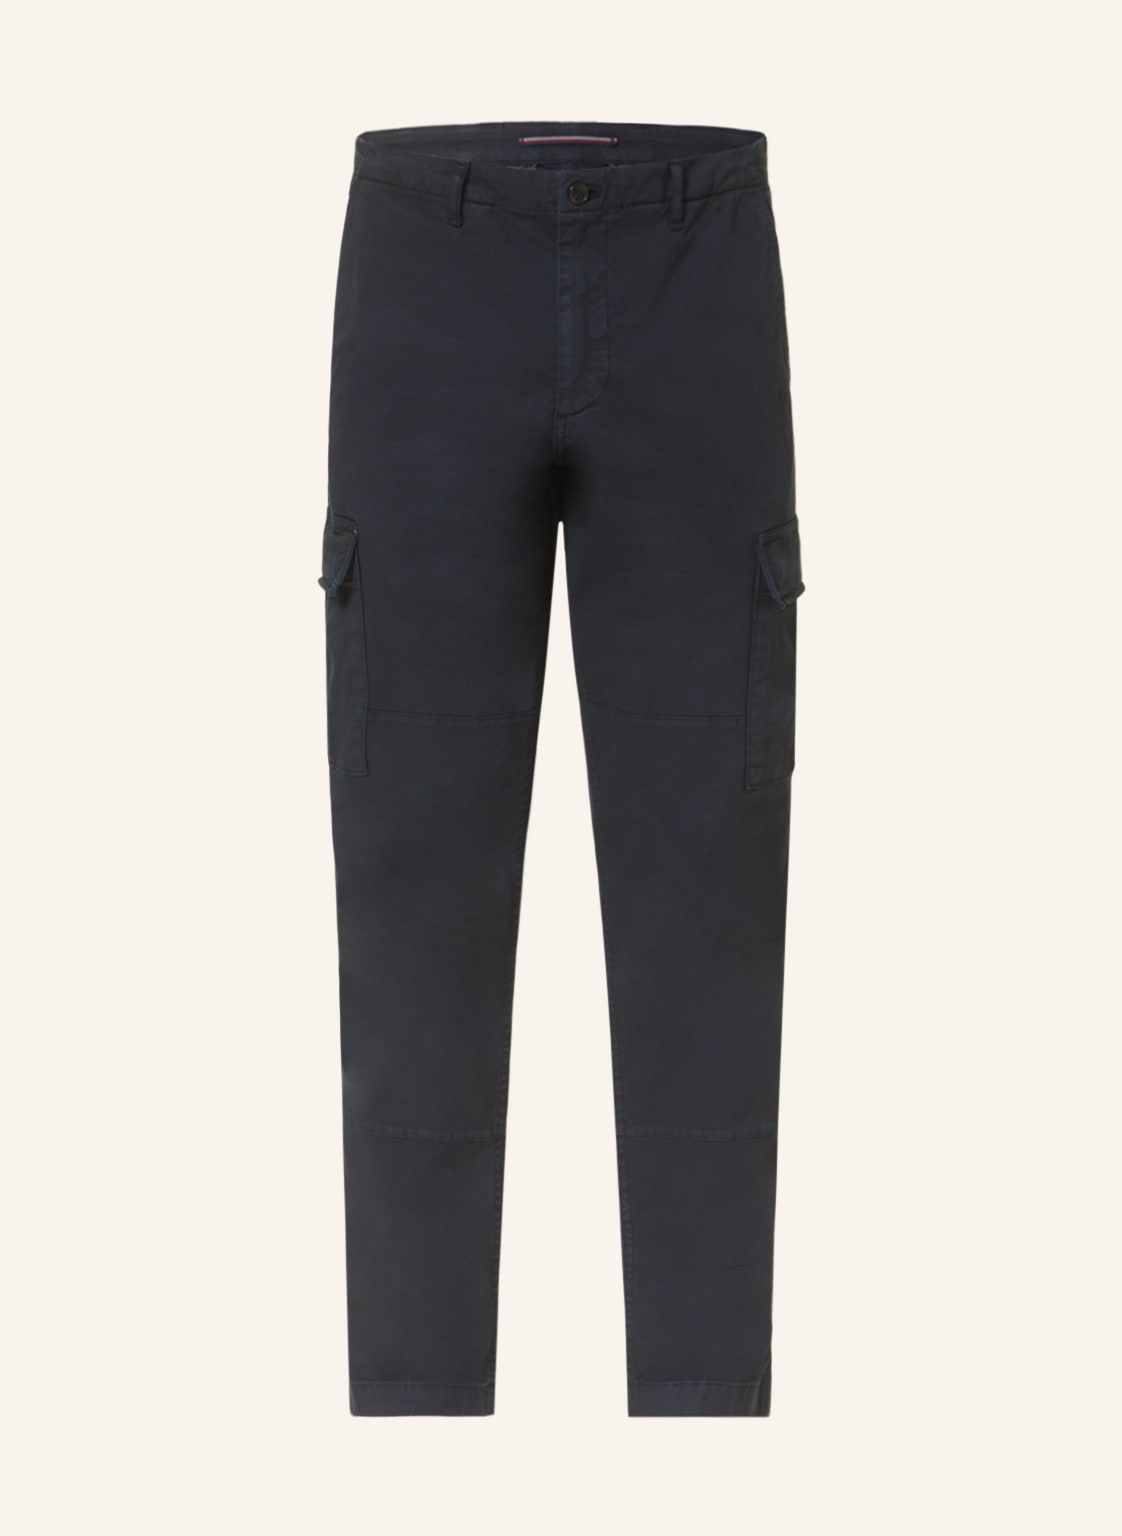 Tommy Hilfiger Cargohose Relaxed Tapered Fit blau von Tommy Hilfiger